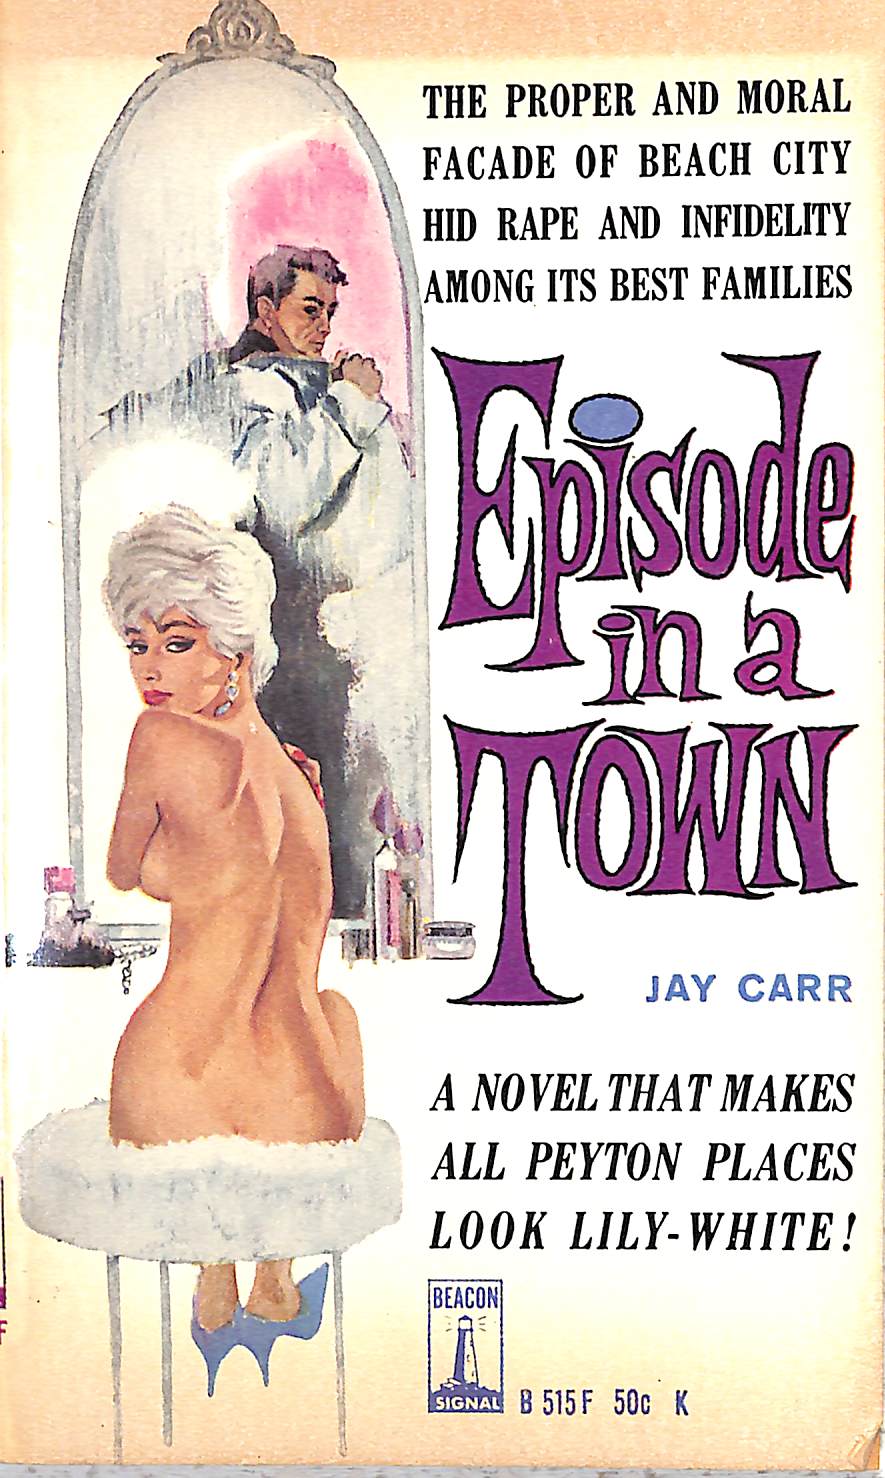 "Episode In A Town" 1962 CARR, Jay